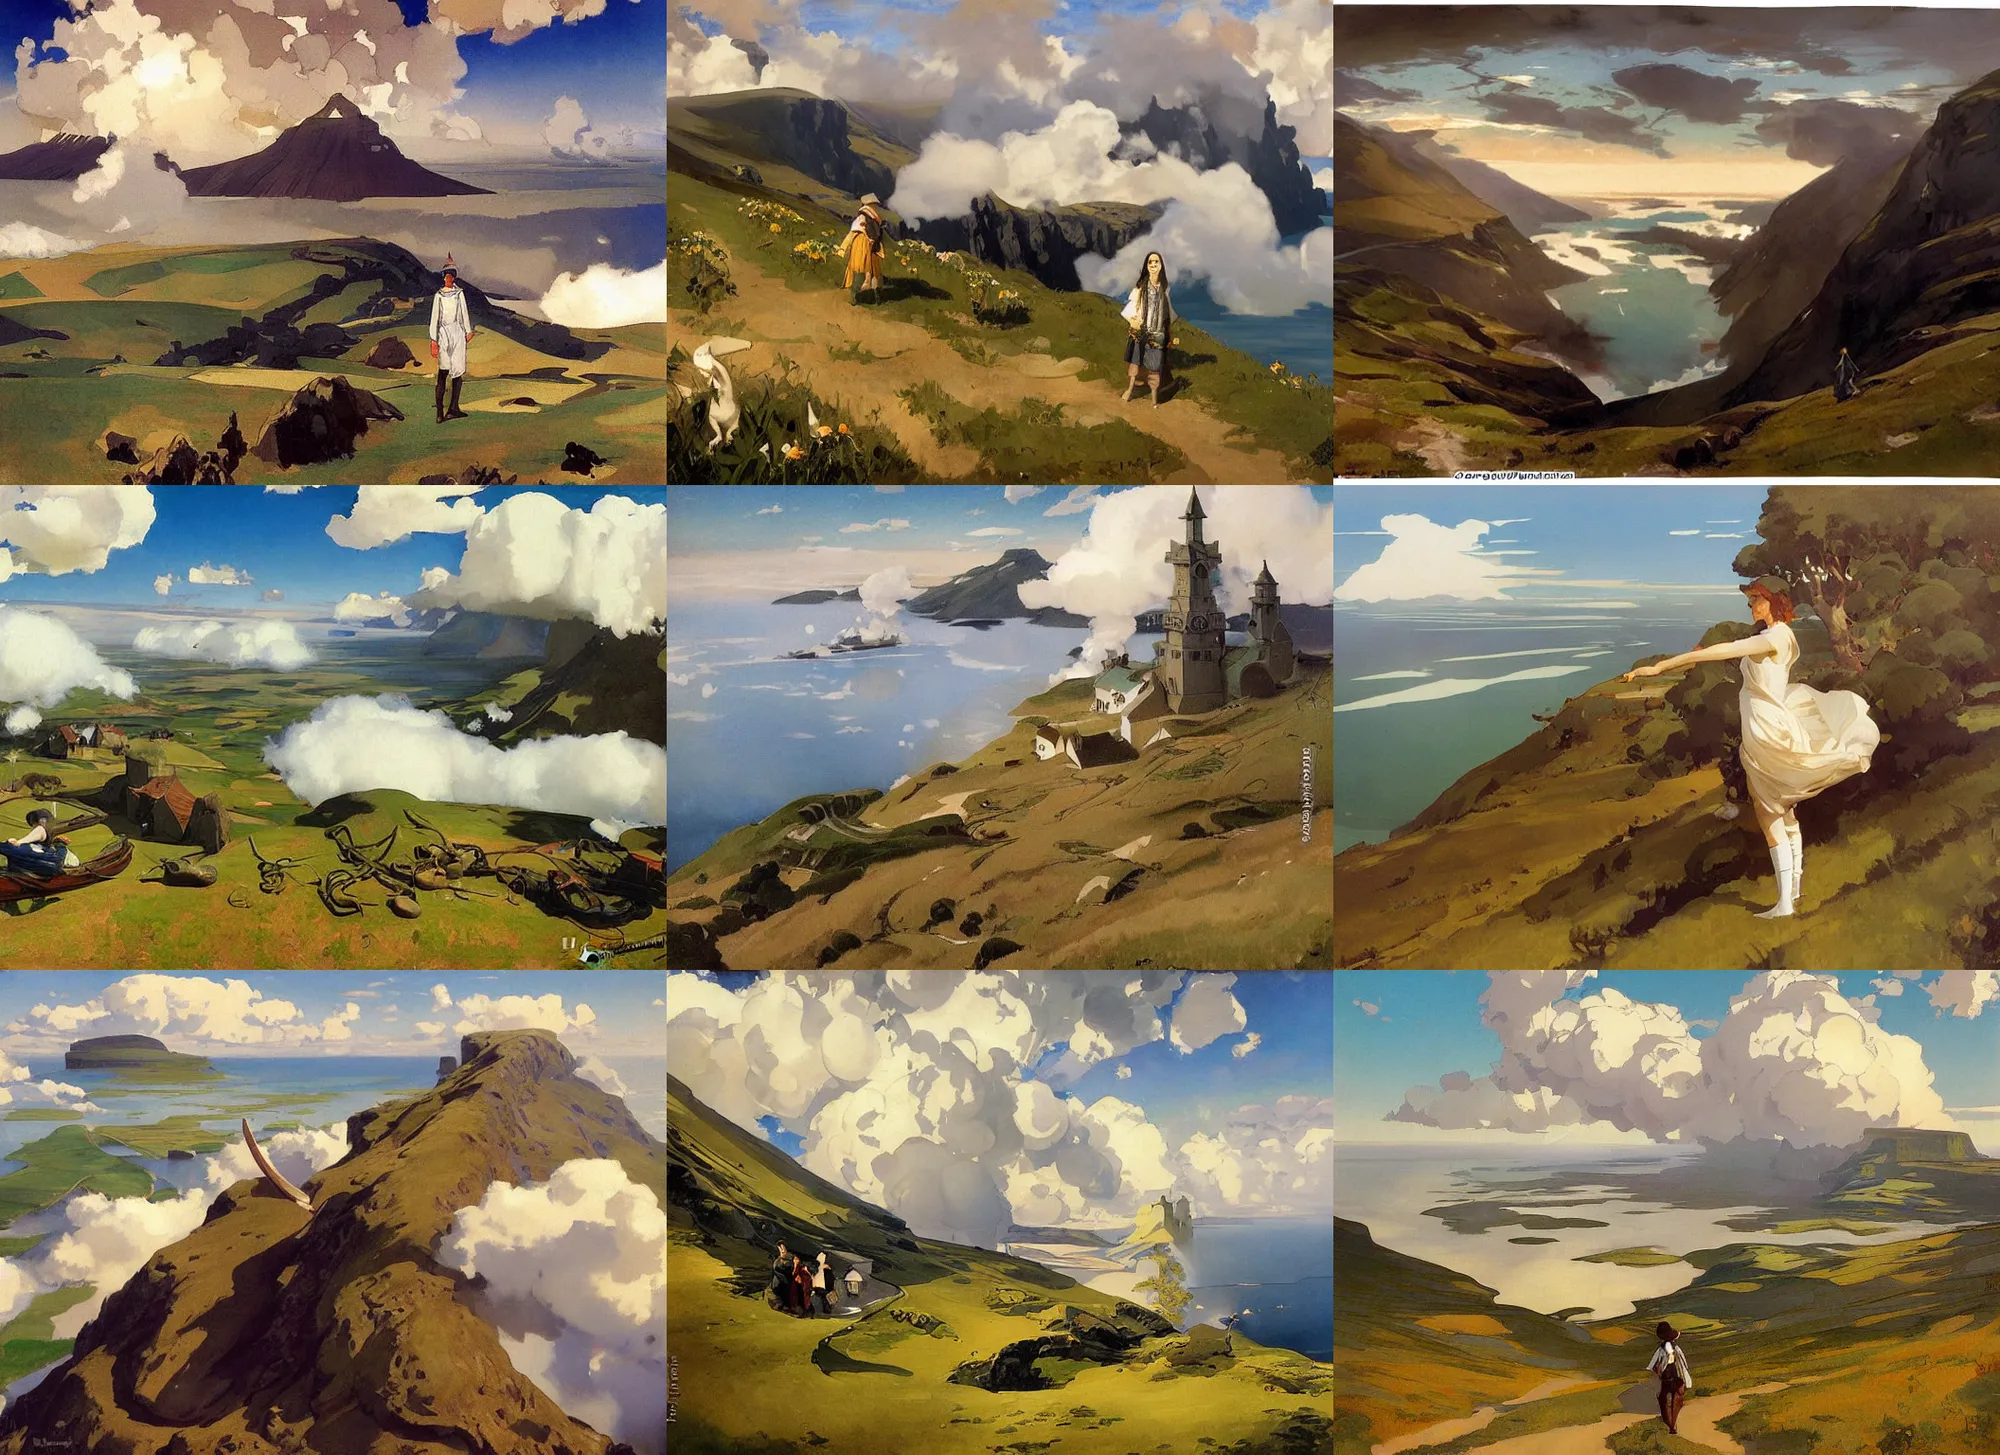 Prompt: painting by sargent and leyendecker and greg hildebrandt, james gurney, apollinaris vasnetsov, savrasov levitan polenov, studio ghibli style, middle ages, above the layered low clouds big lake wide river road to sea bay view faroe azores overcast